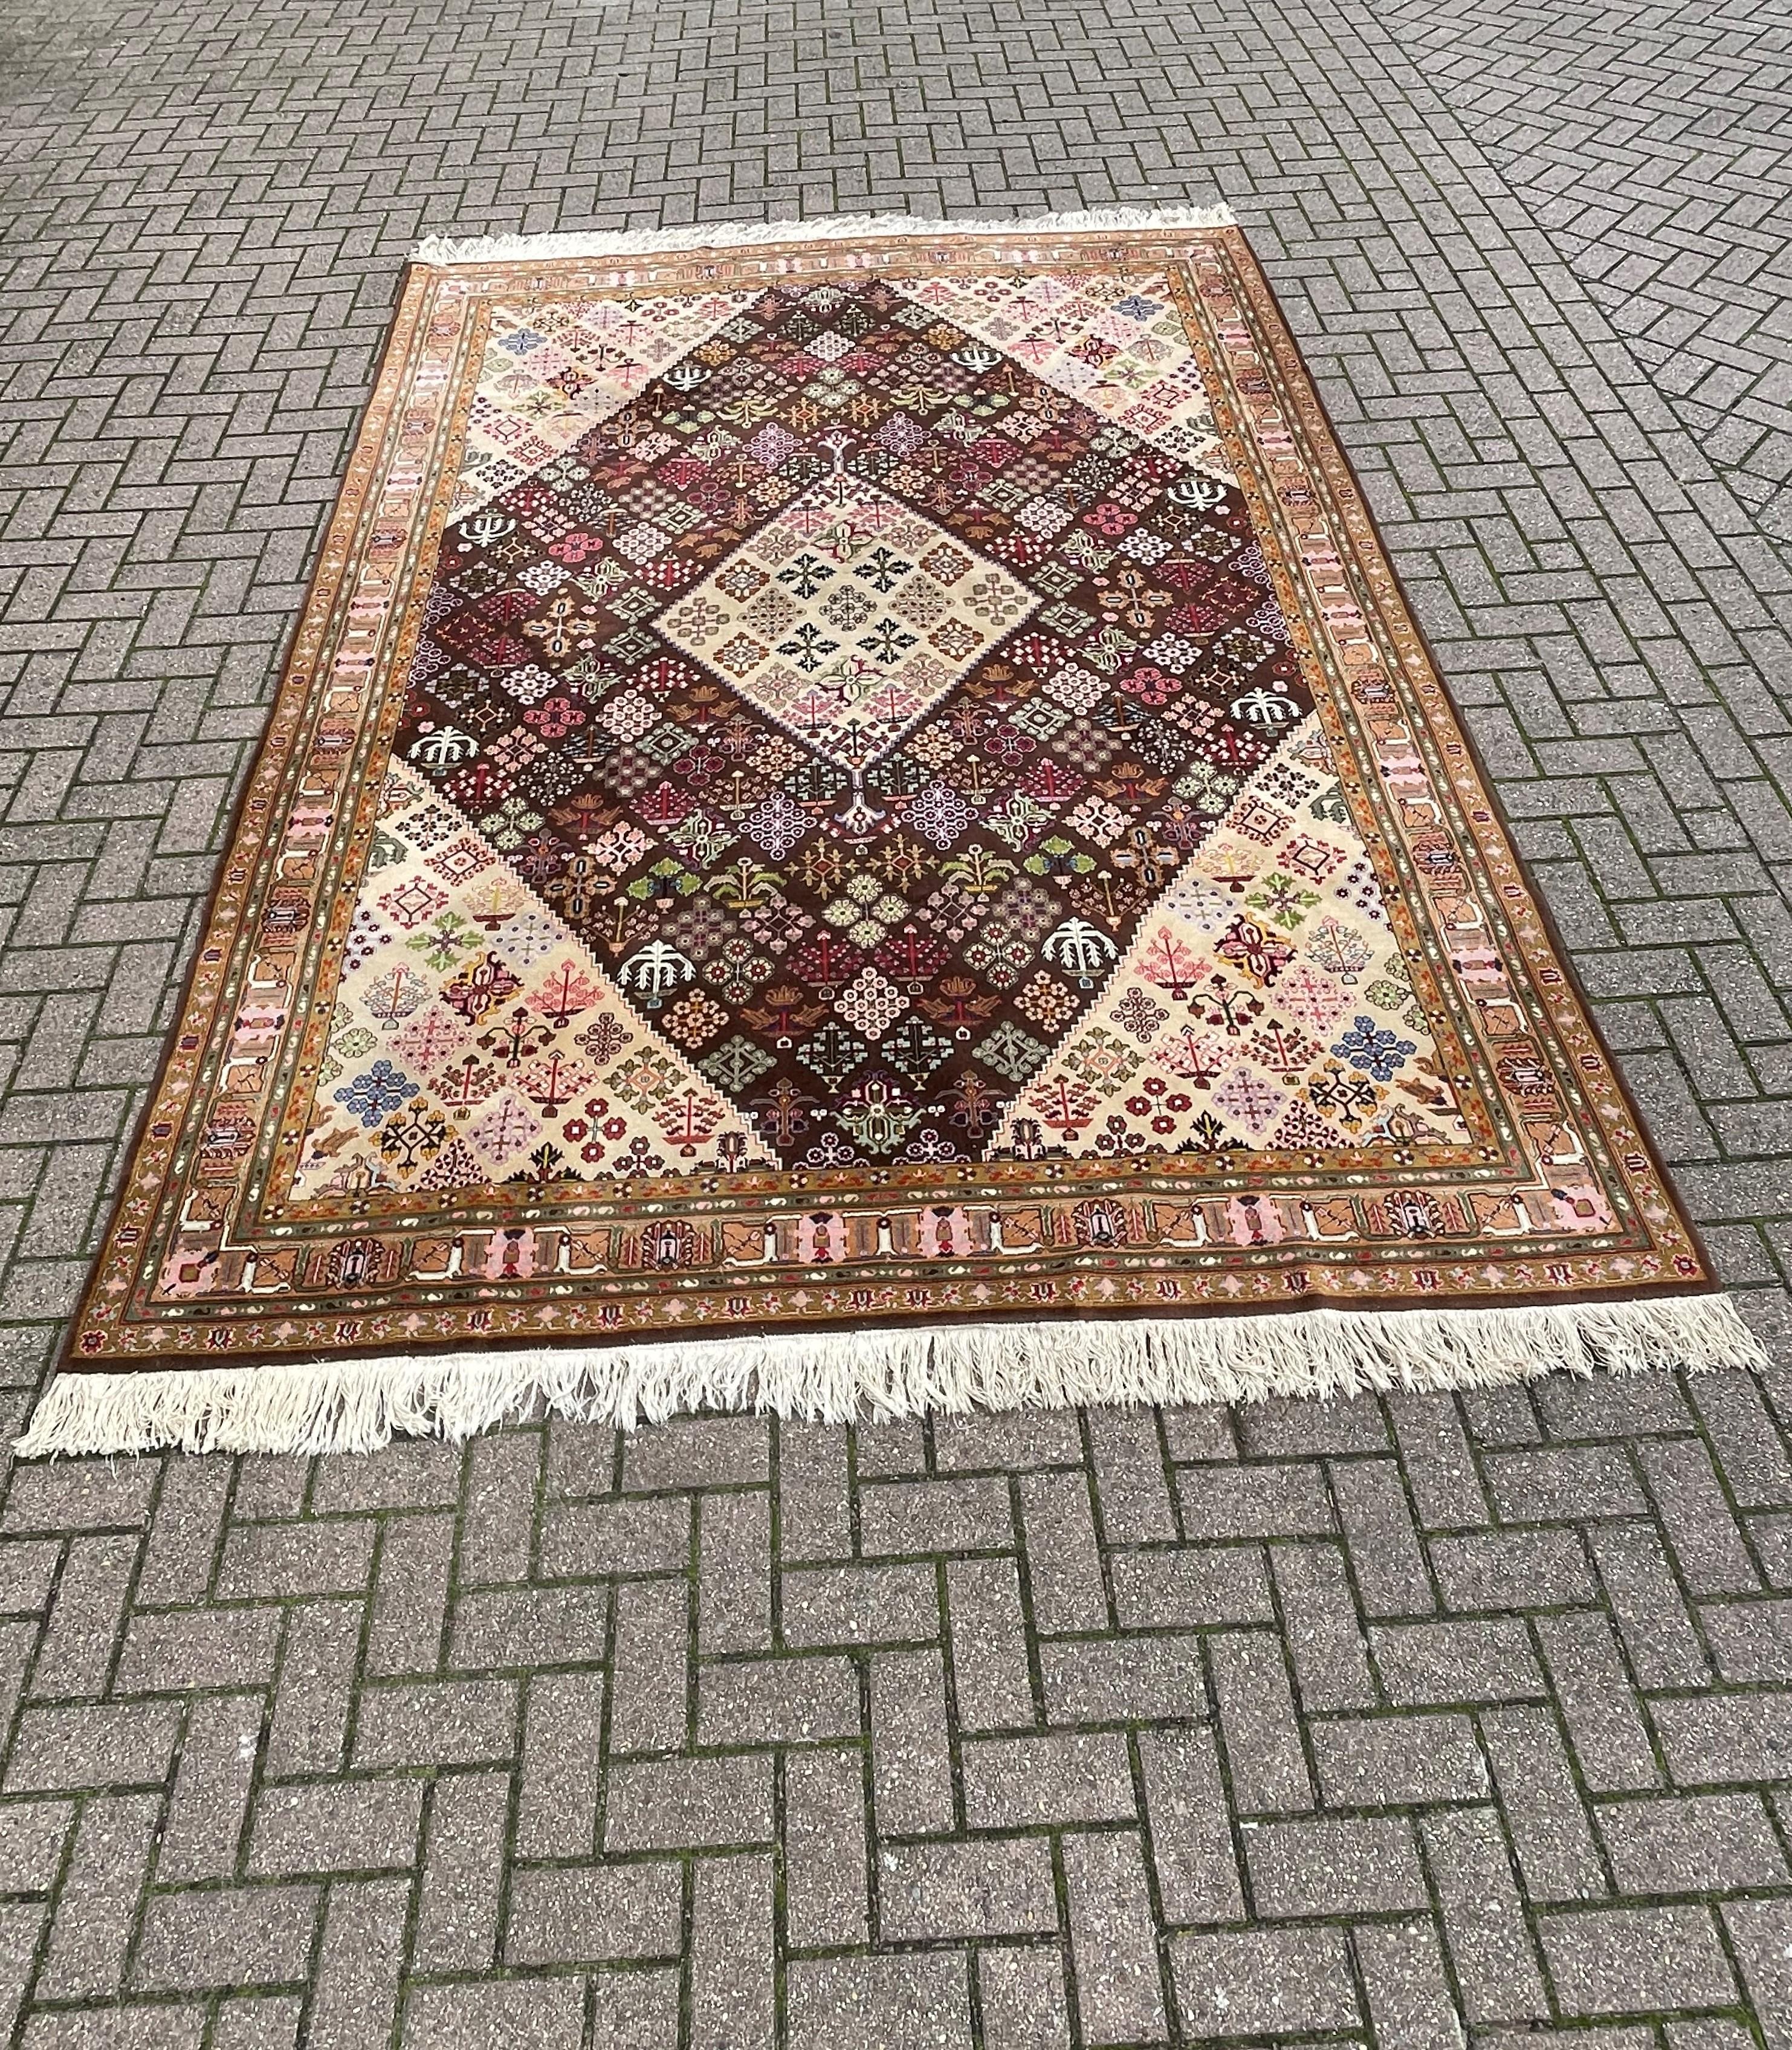 Rare and superb condition, vintage rug with wonderful patterns and 'happy colors'.

When it comes to decorating the floor of your home we cannot think of a better way then with a good quality and clean rug. This good size, stylish and hand-knotted